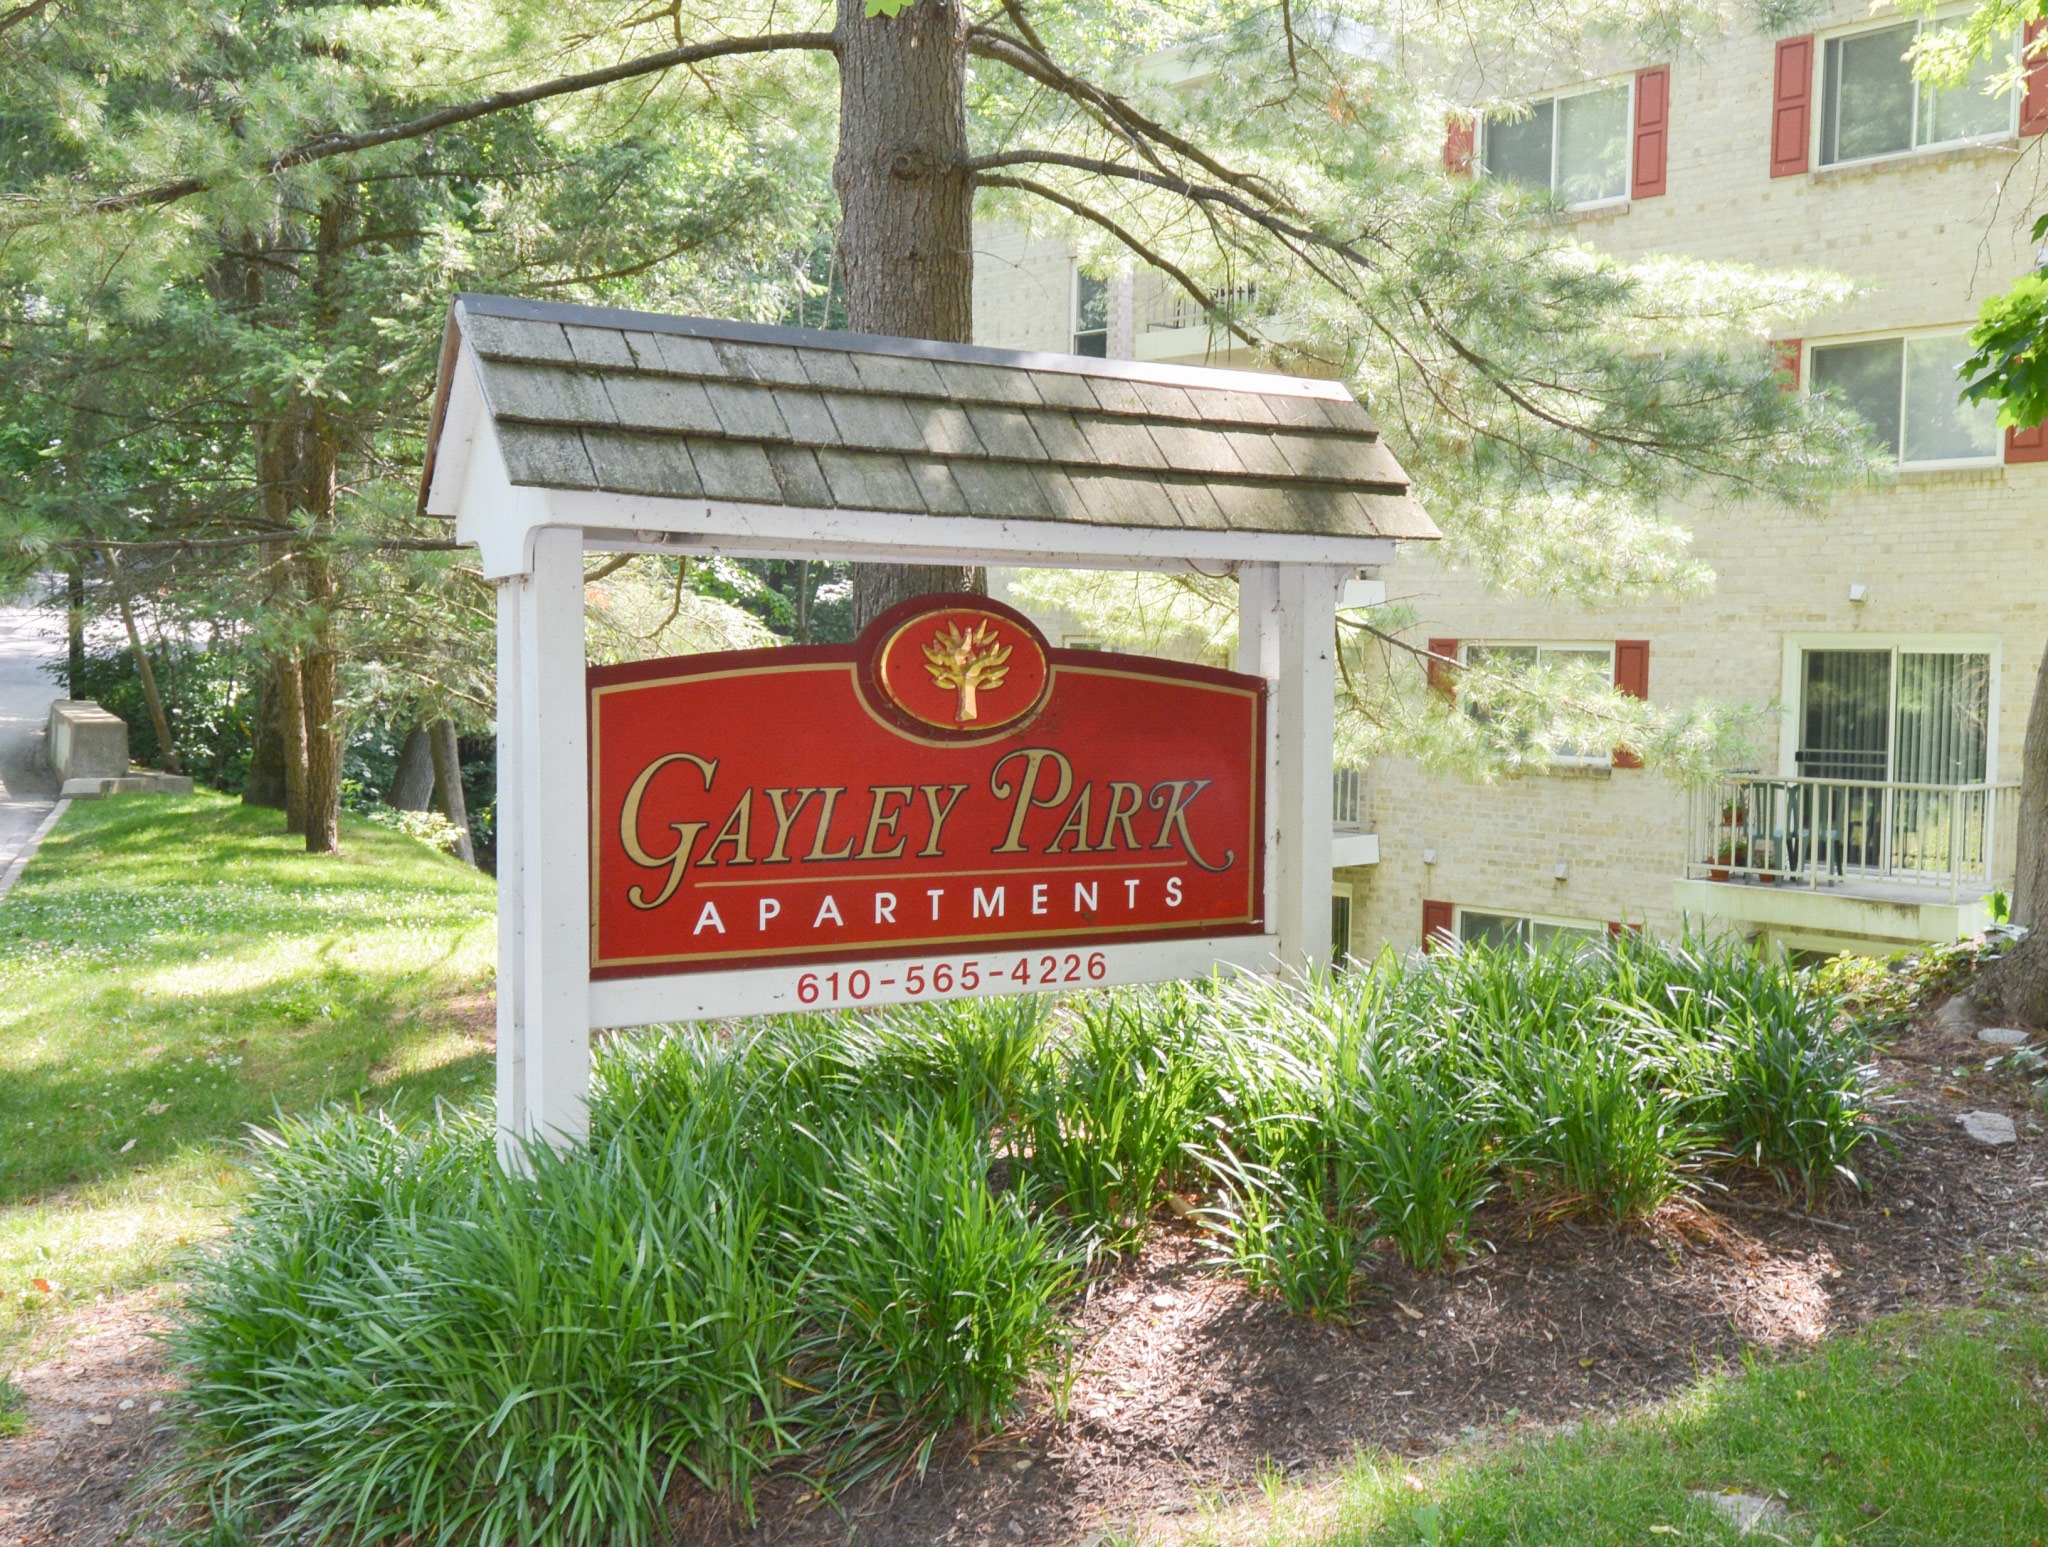 Gayley Park apartments welcome sign, fitted in a beautiful garden